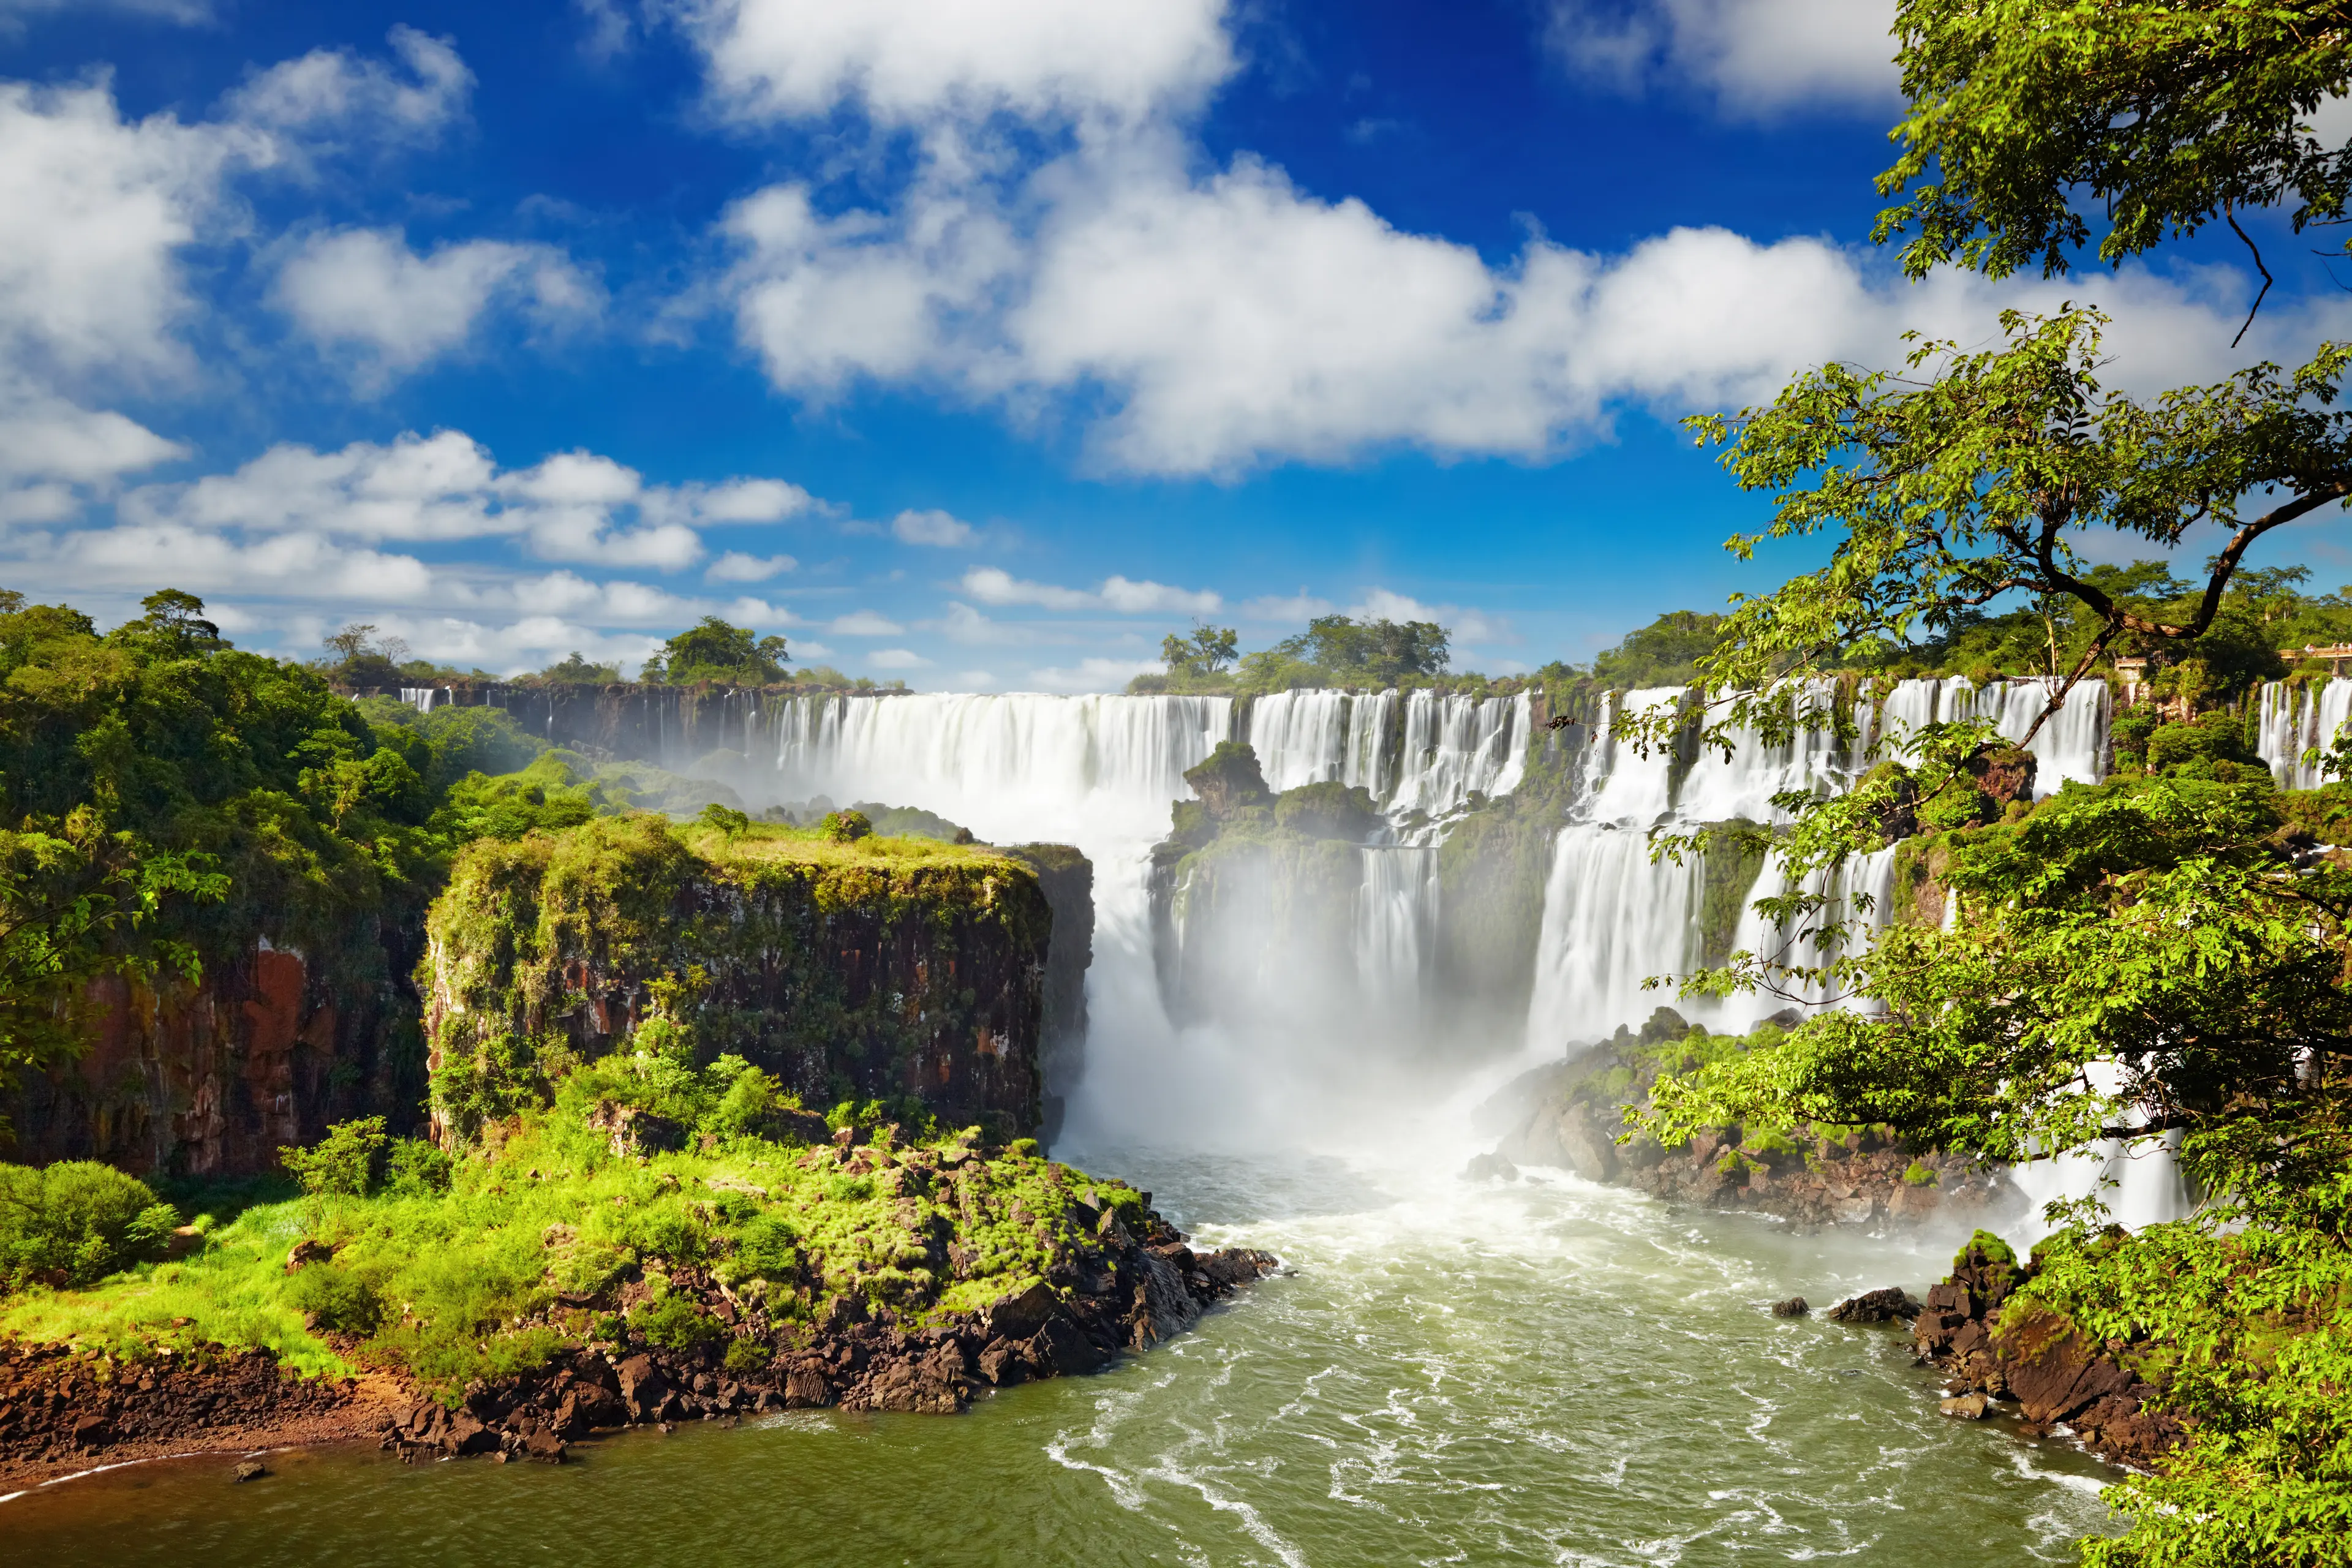 1-Day Local Experience: Sightseeing & Outdoor Activities at Iguazu Falls